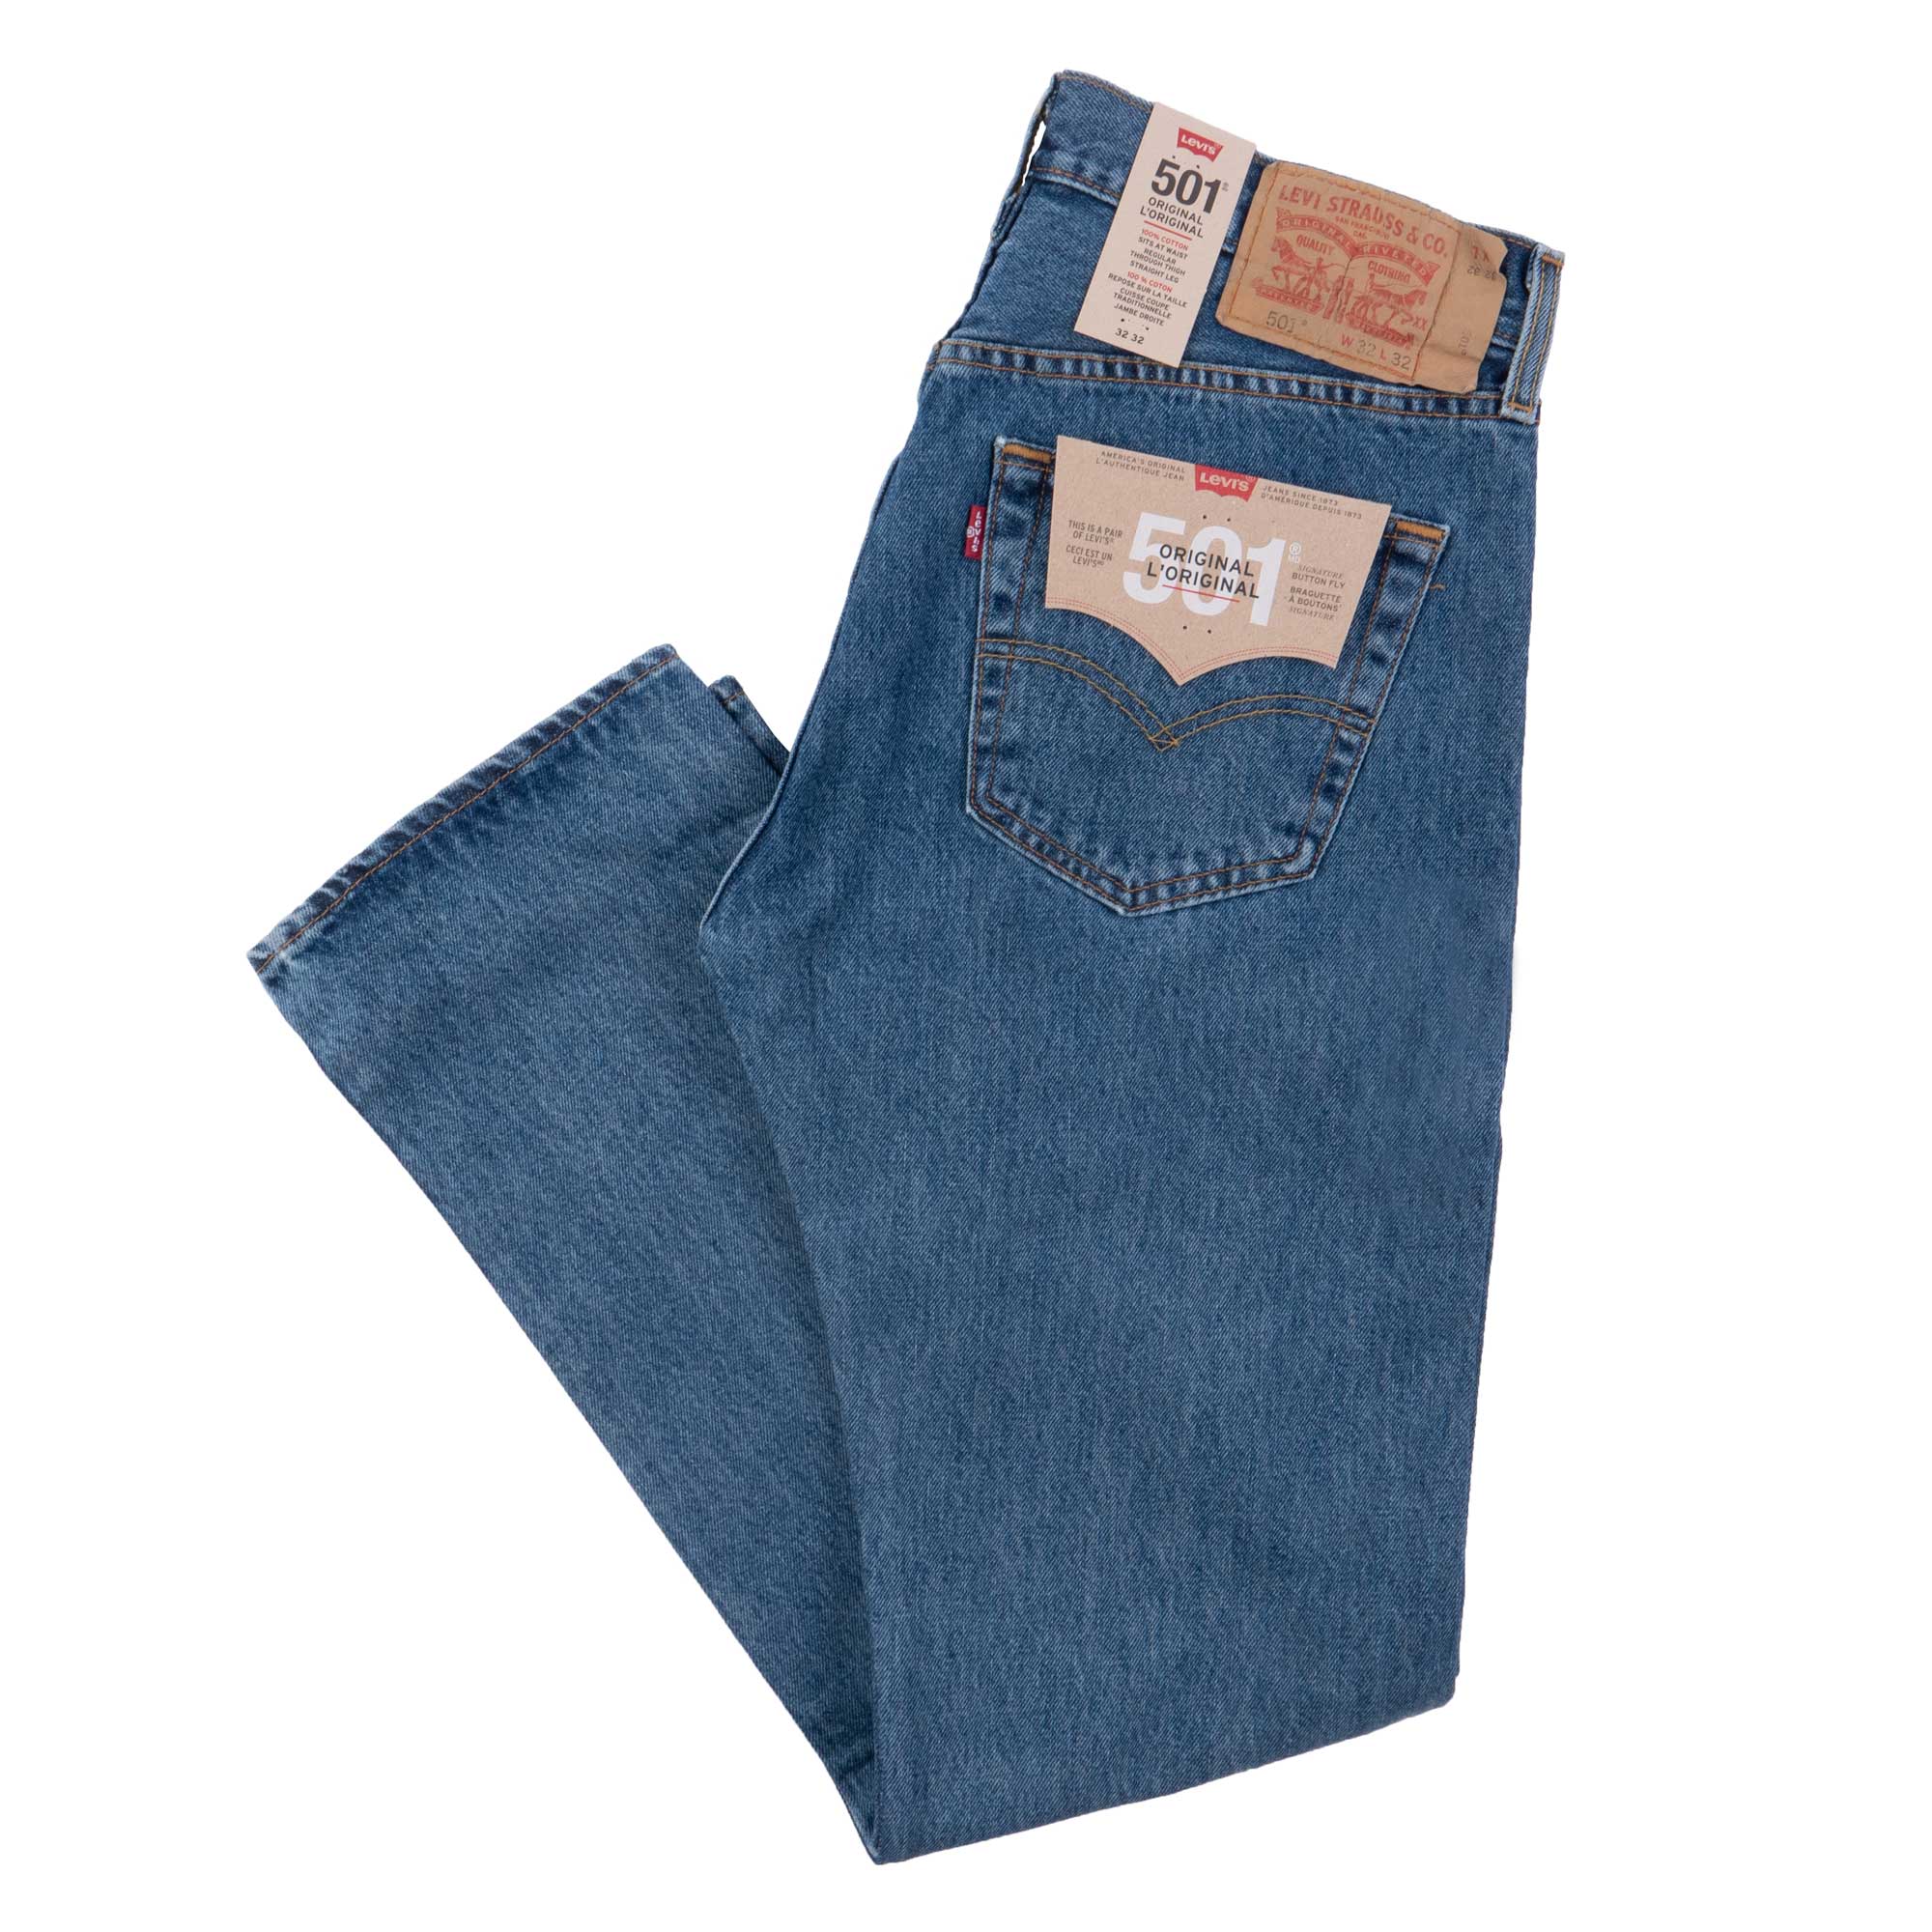 Levis Jeans, Shipped Free at Zappos.com